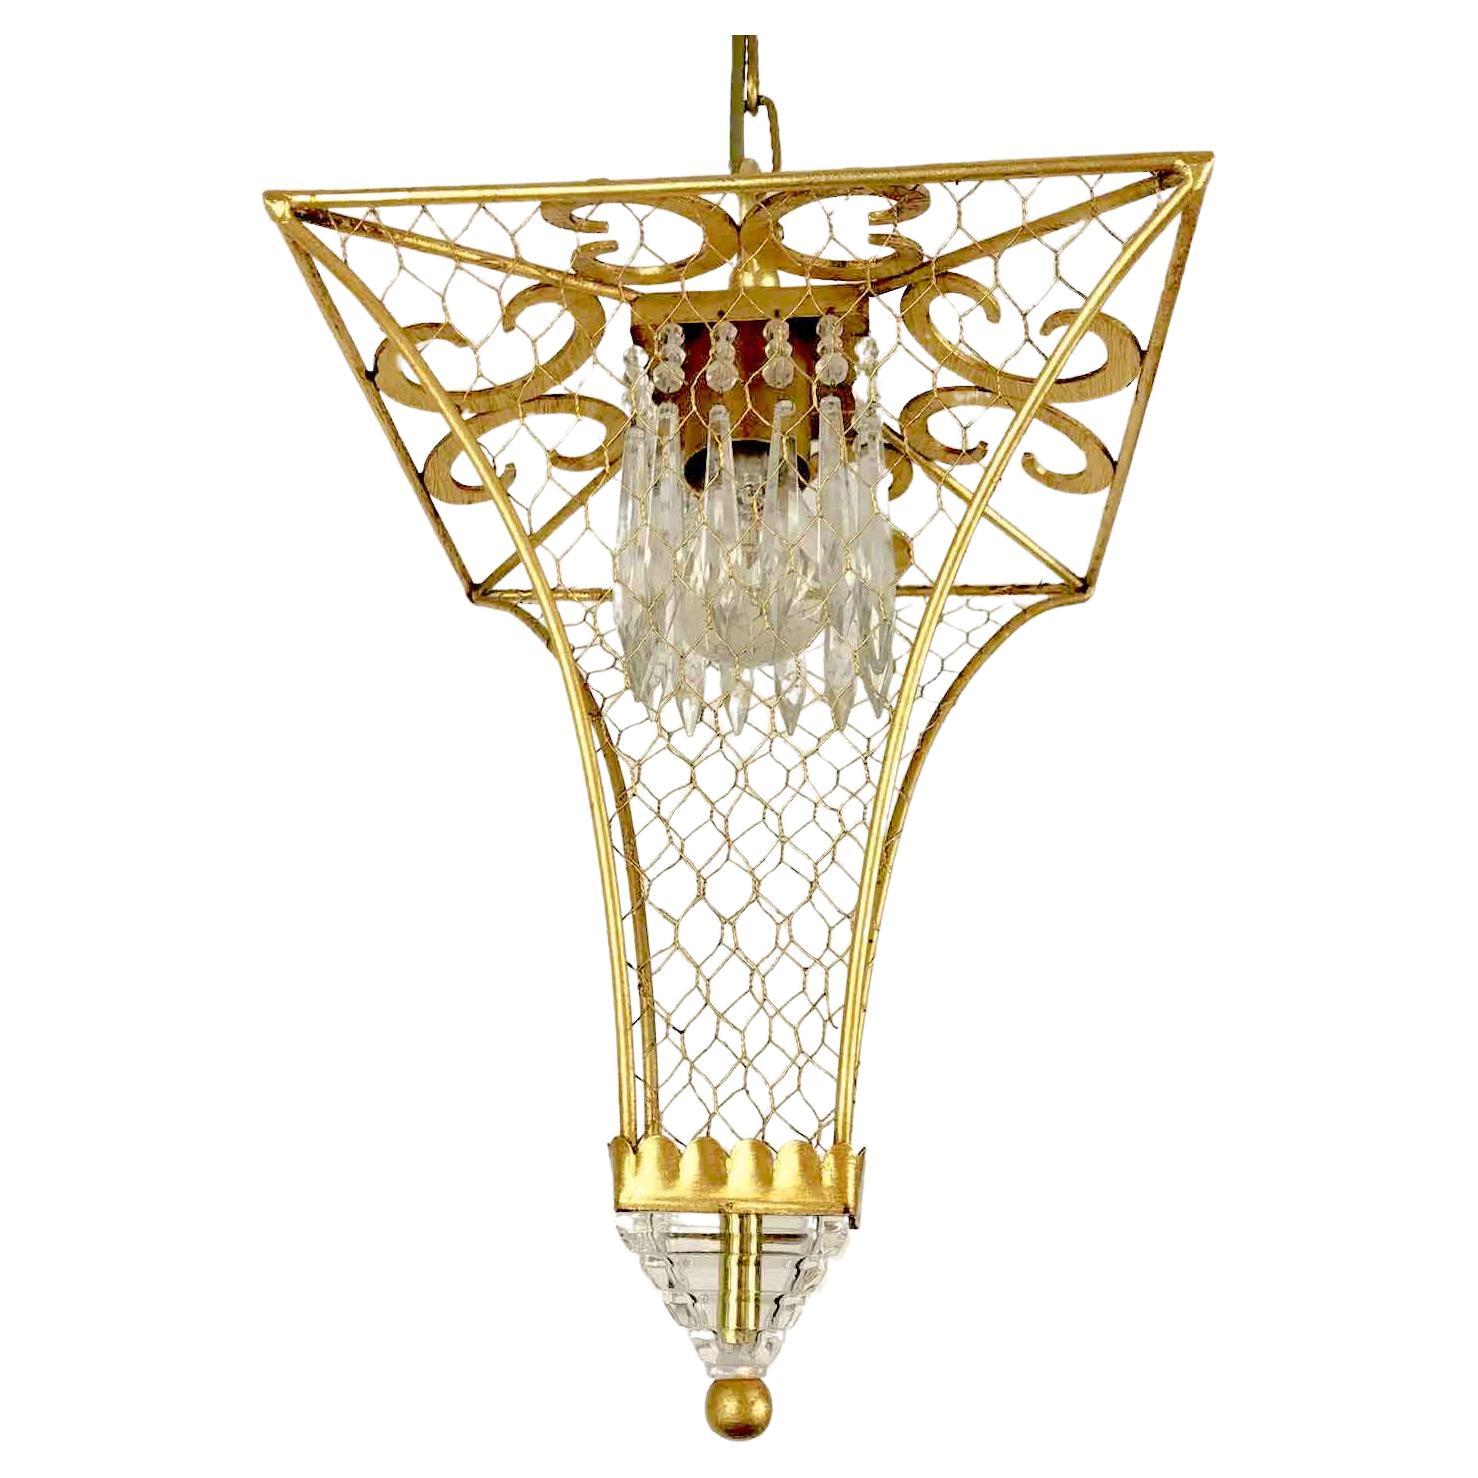 Florentine Pagoda Pendant by Banci Italian Gilded Lantern with Crystals 1990s